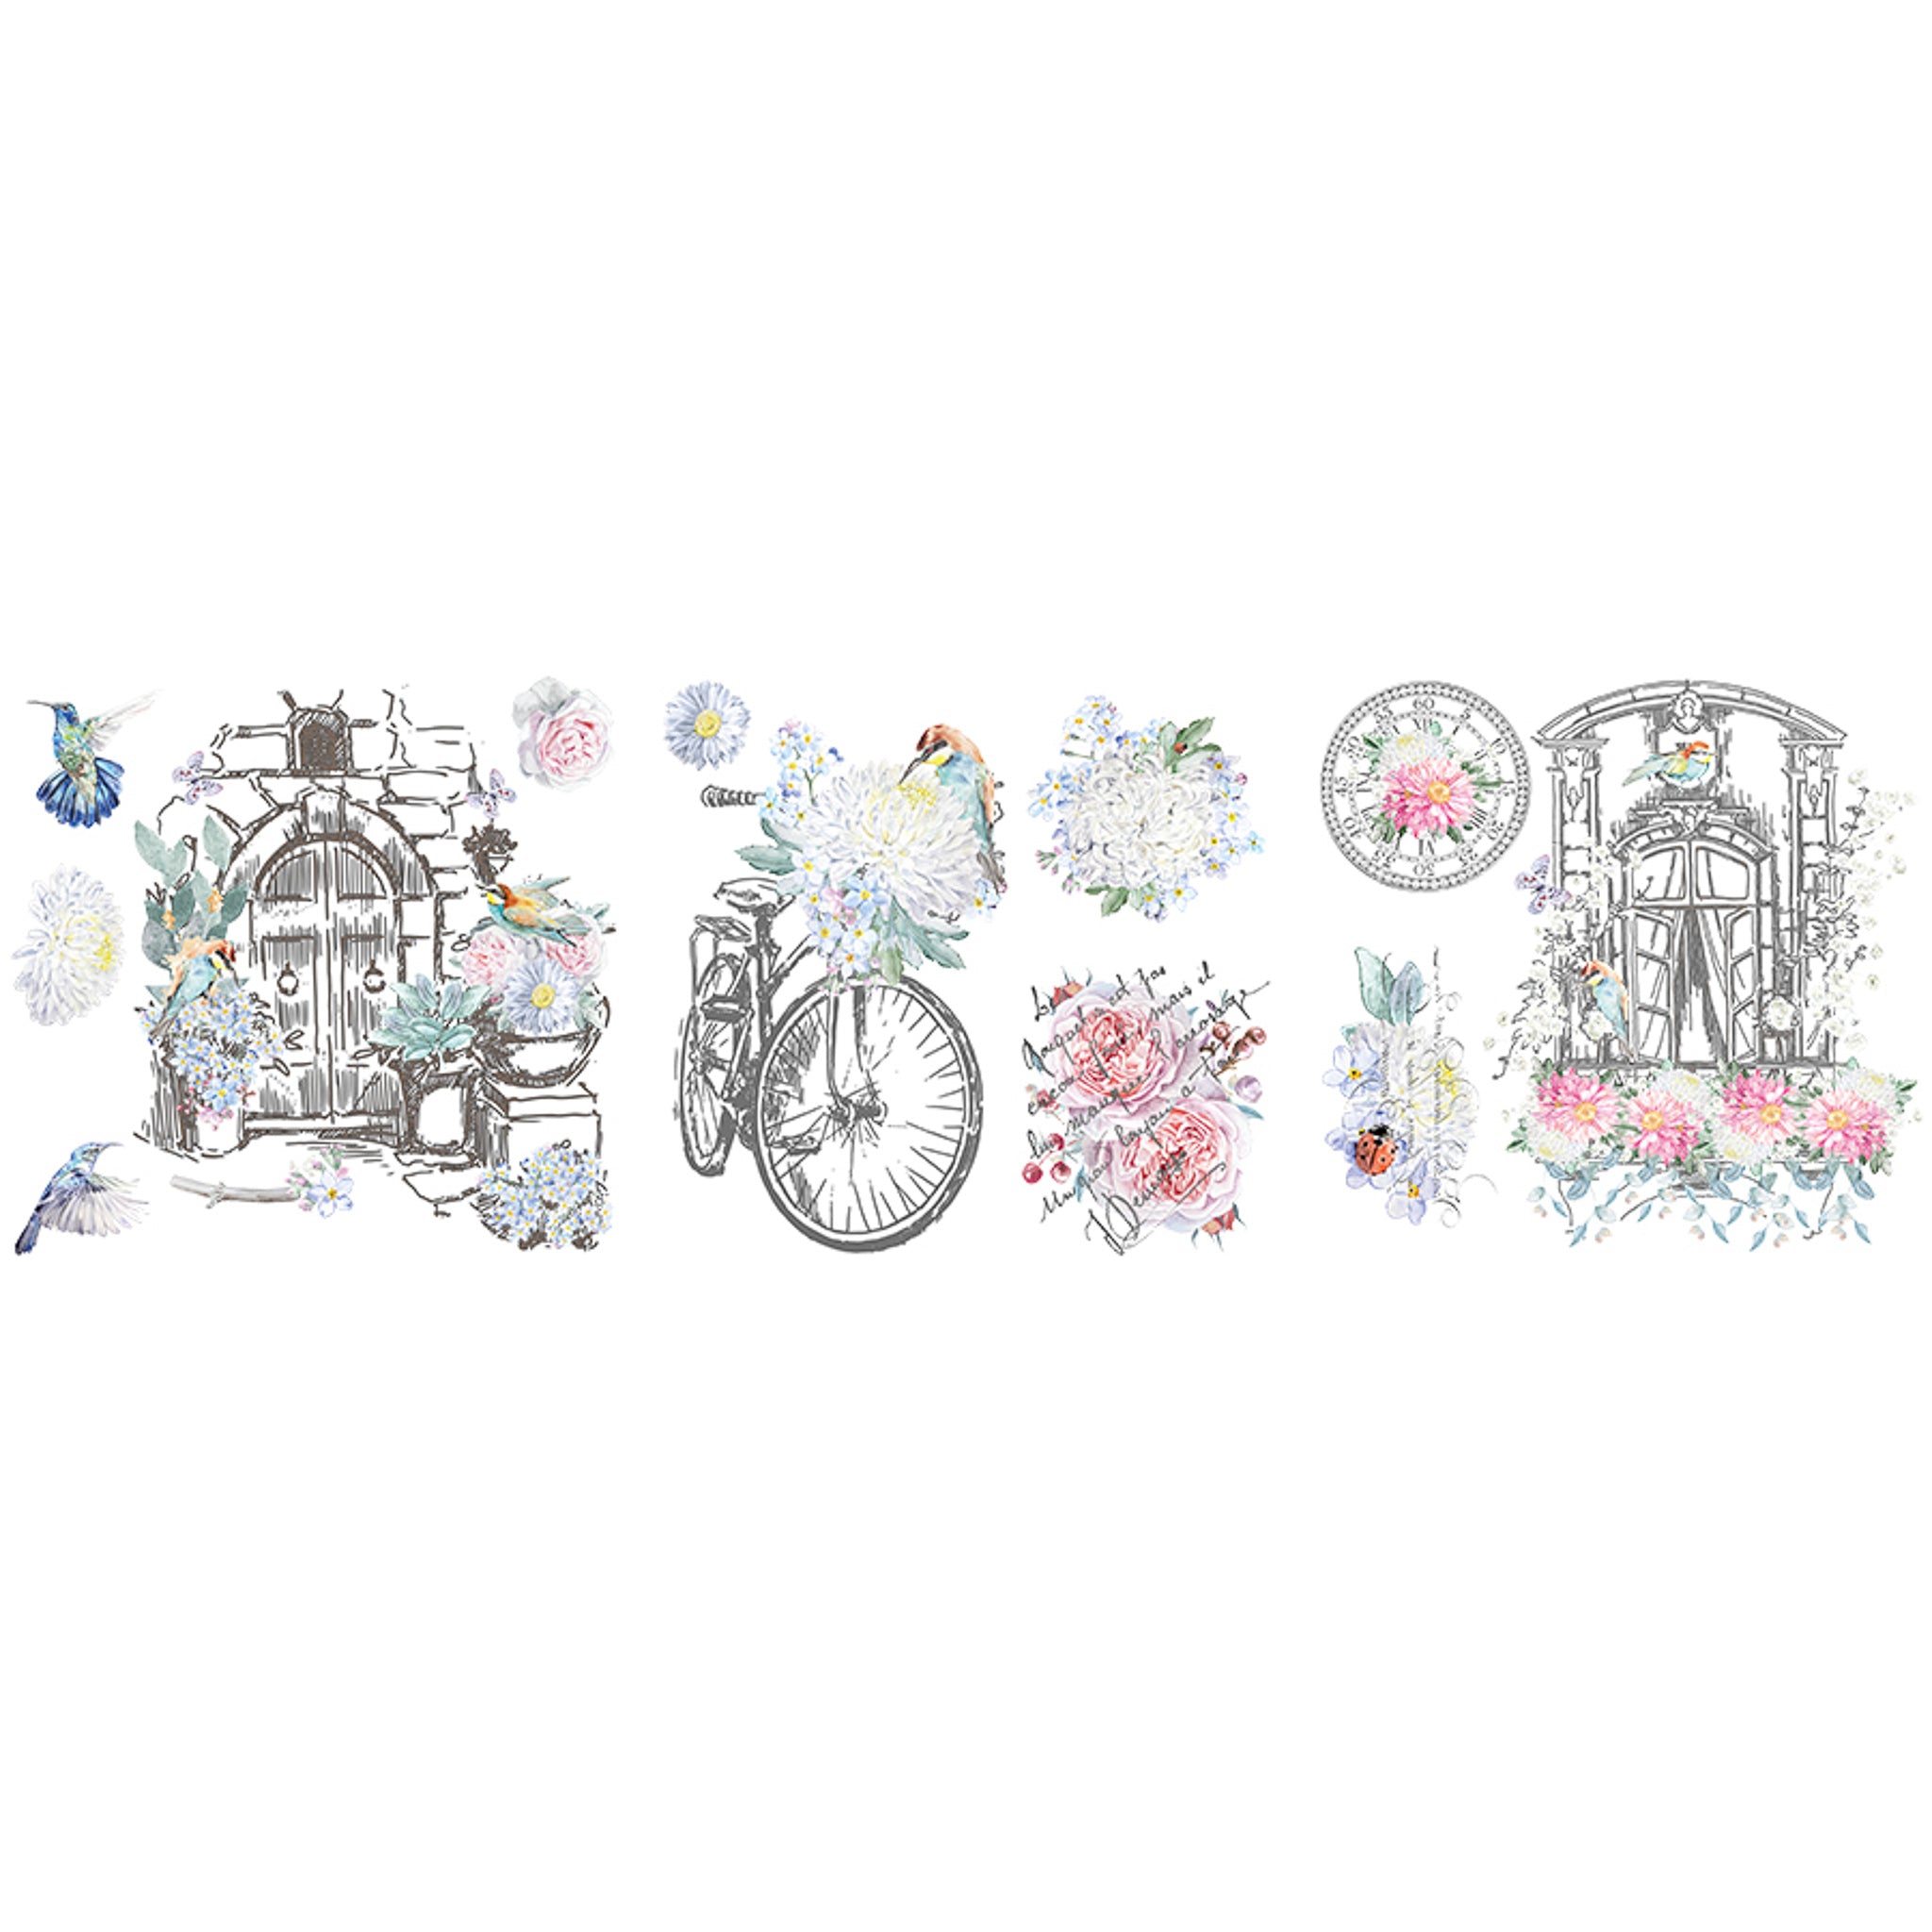 On a white background are three 12 x 12 inch sheets of small rub-on transfers that feature pink roses, a hand drawn bicycle, a window and a front door.